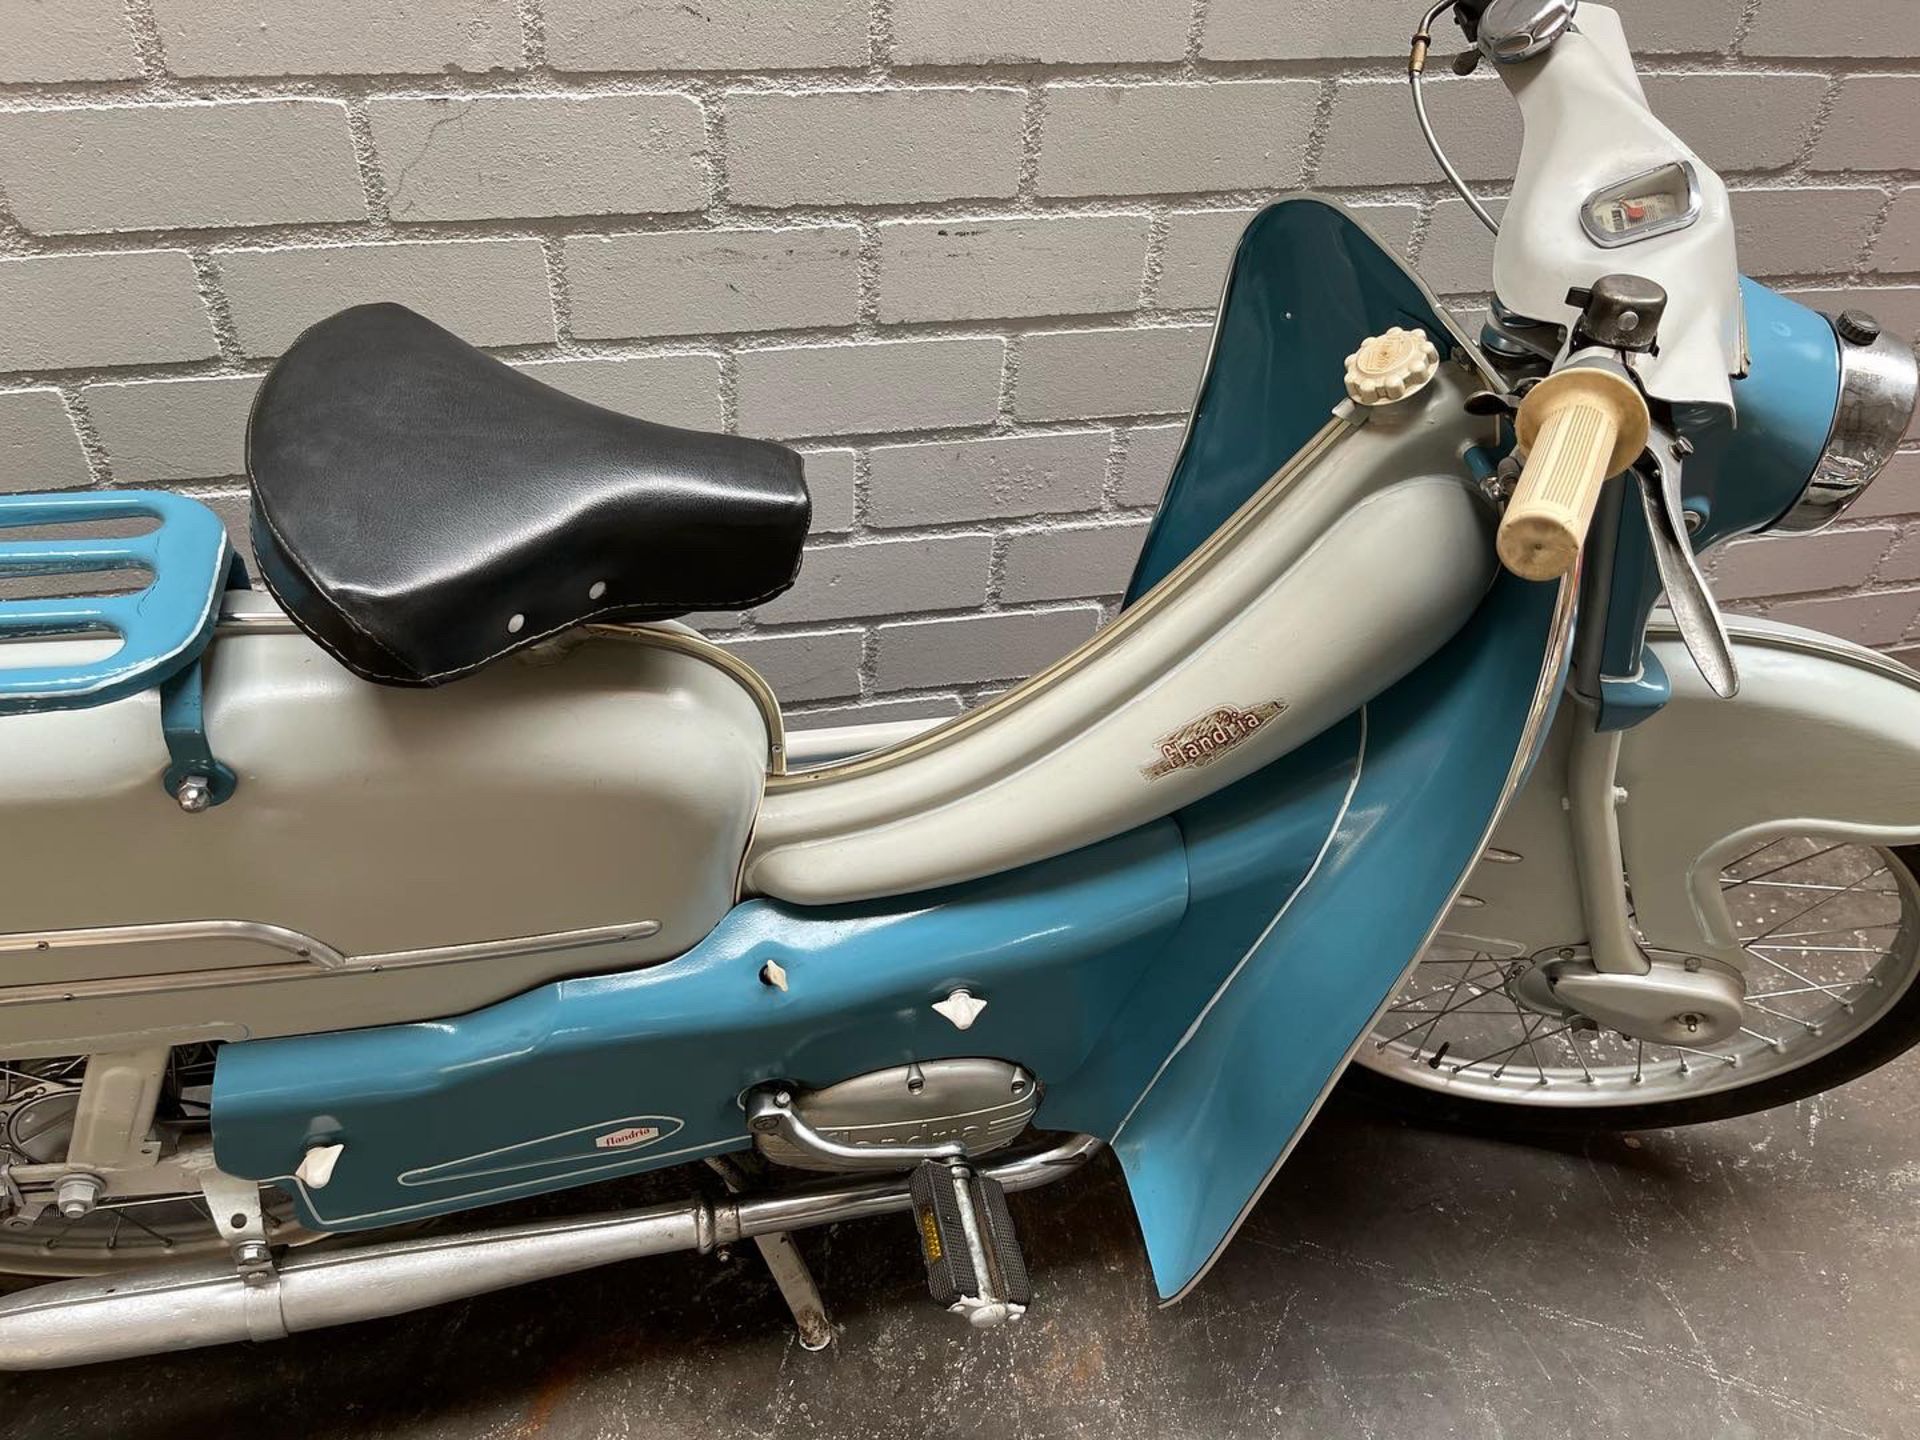 Vintage Flandria 49cc Moped ca. 1960s - Image 6 of 10